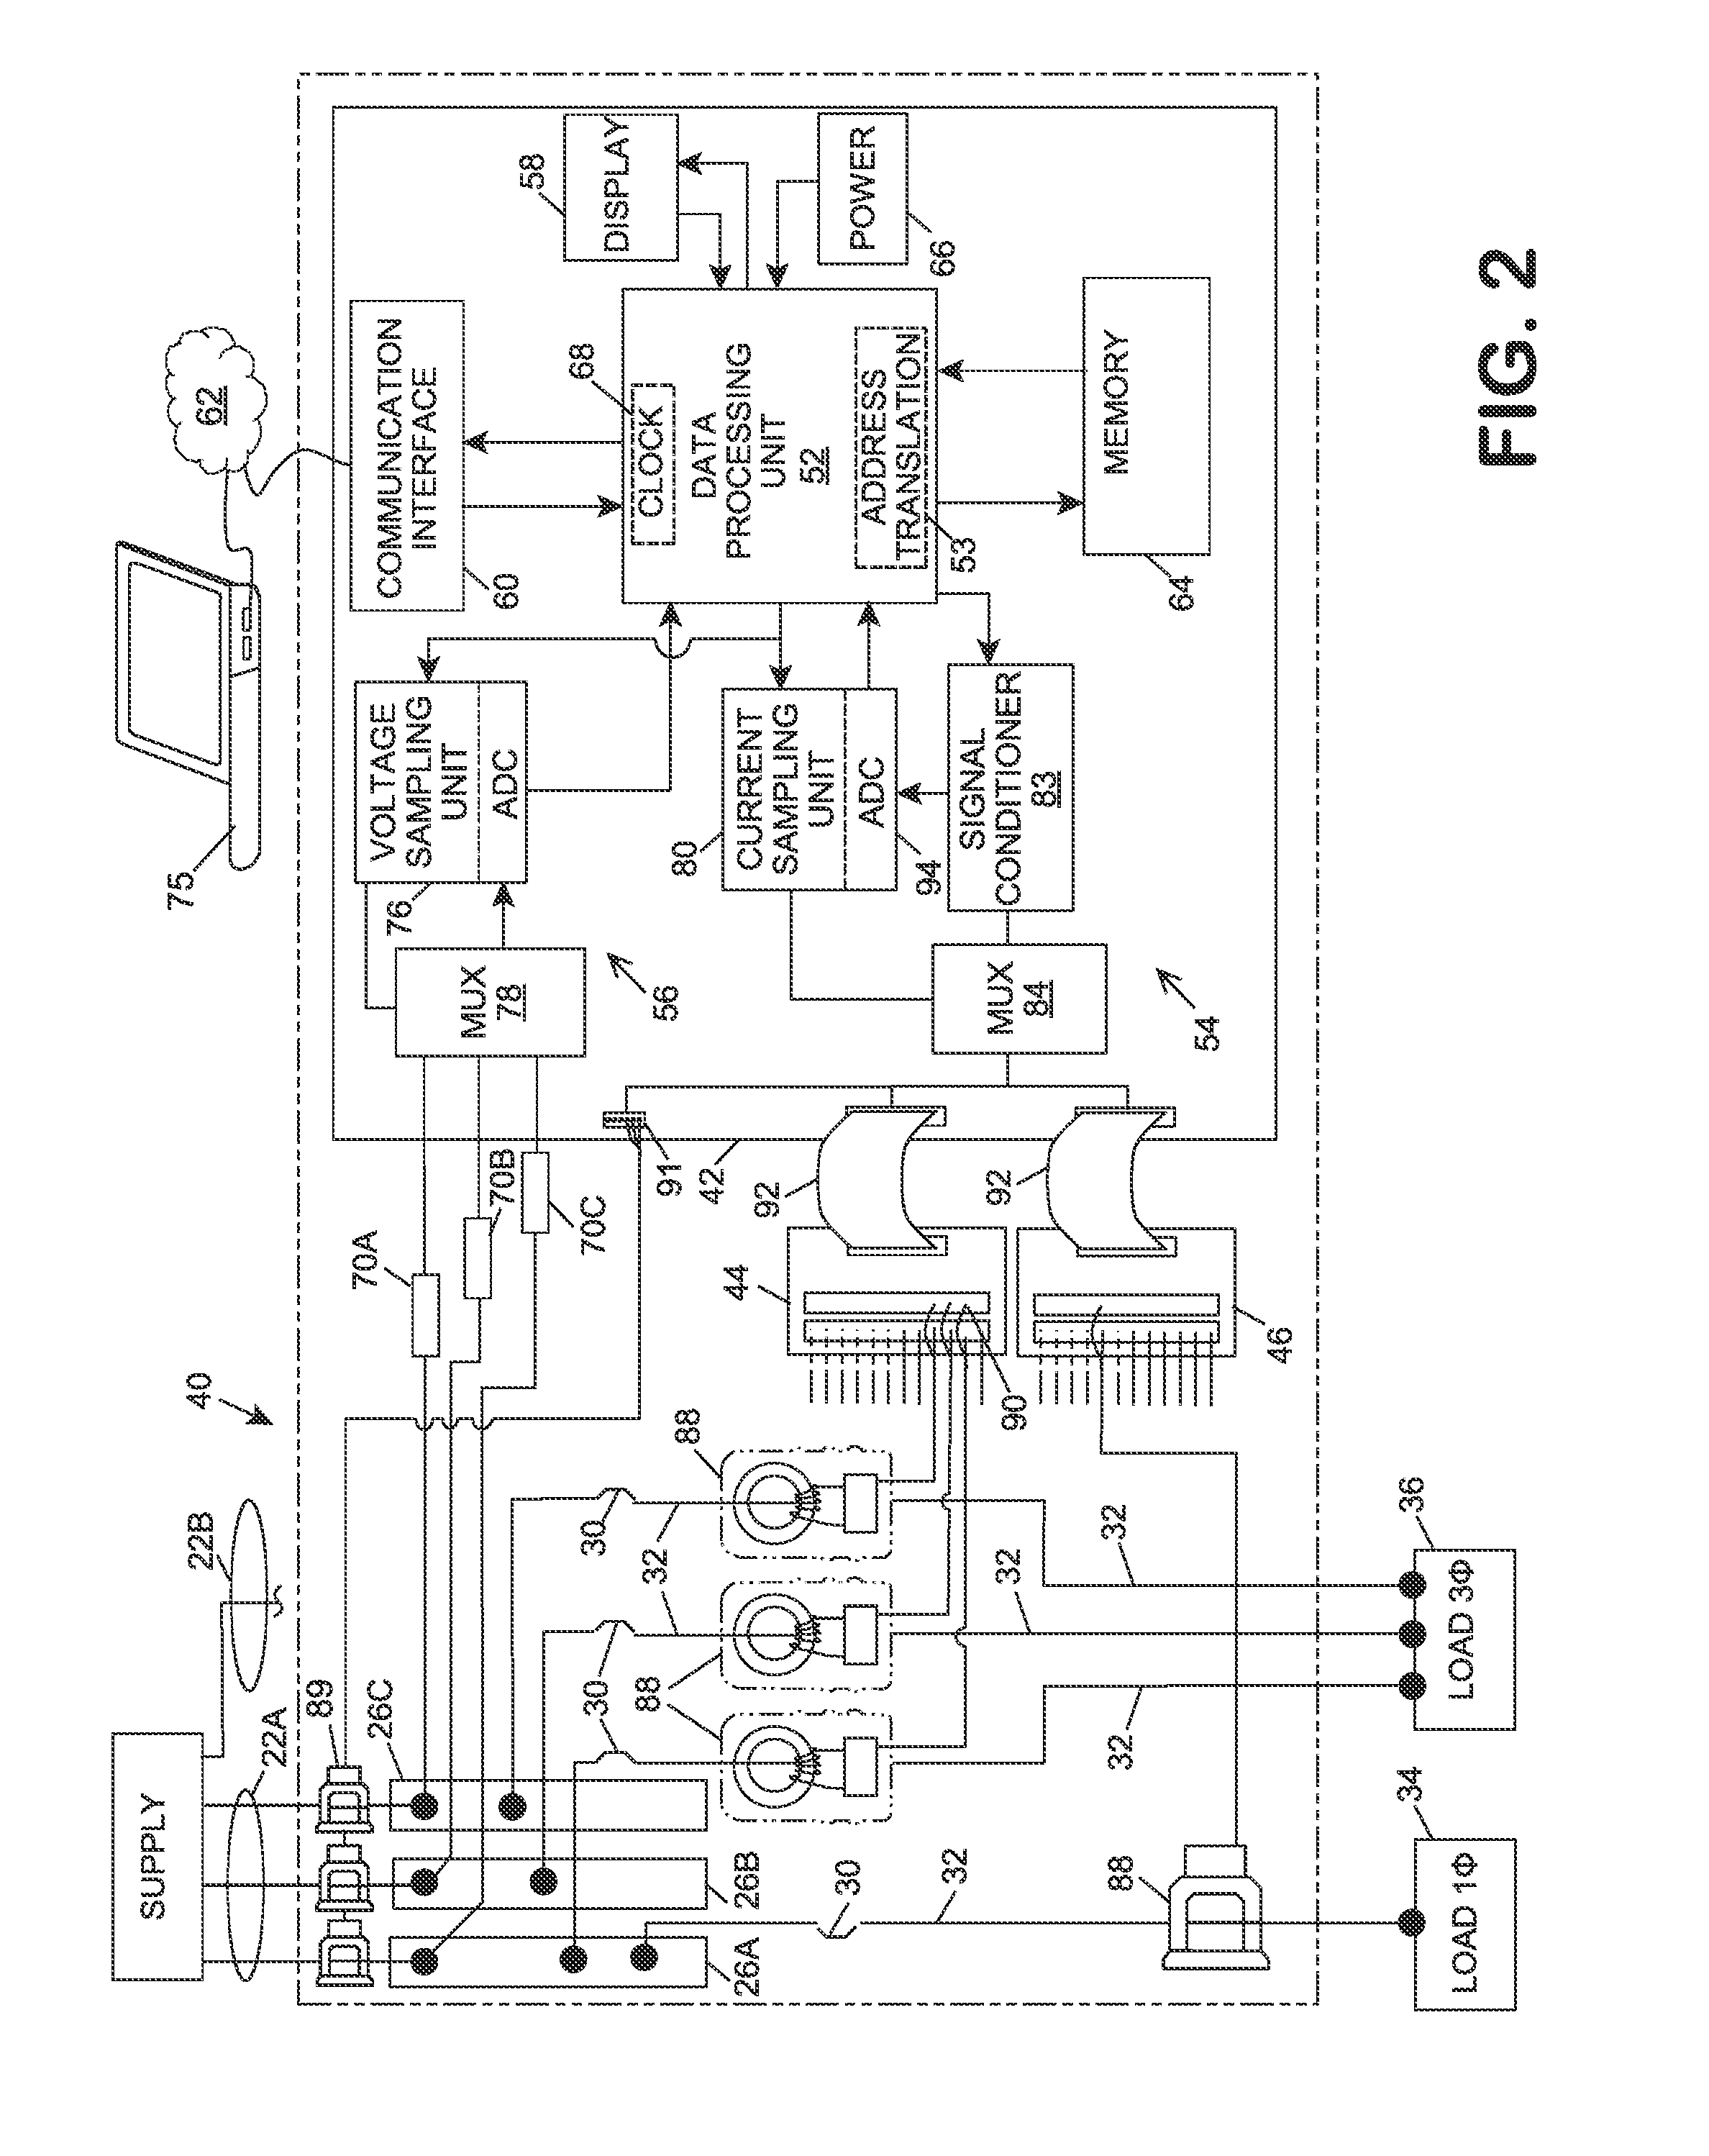 Power meter with automatic configuration